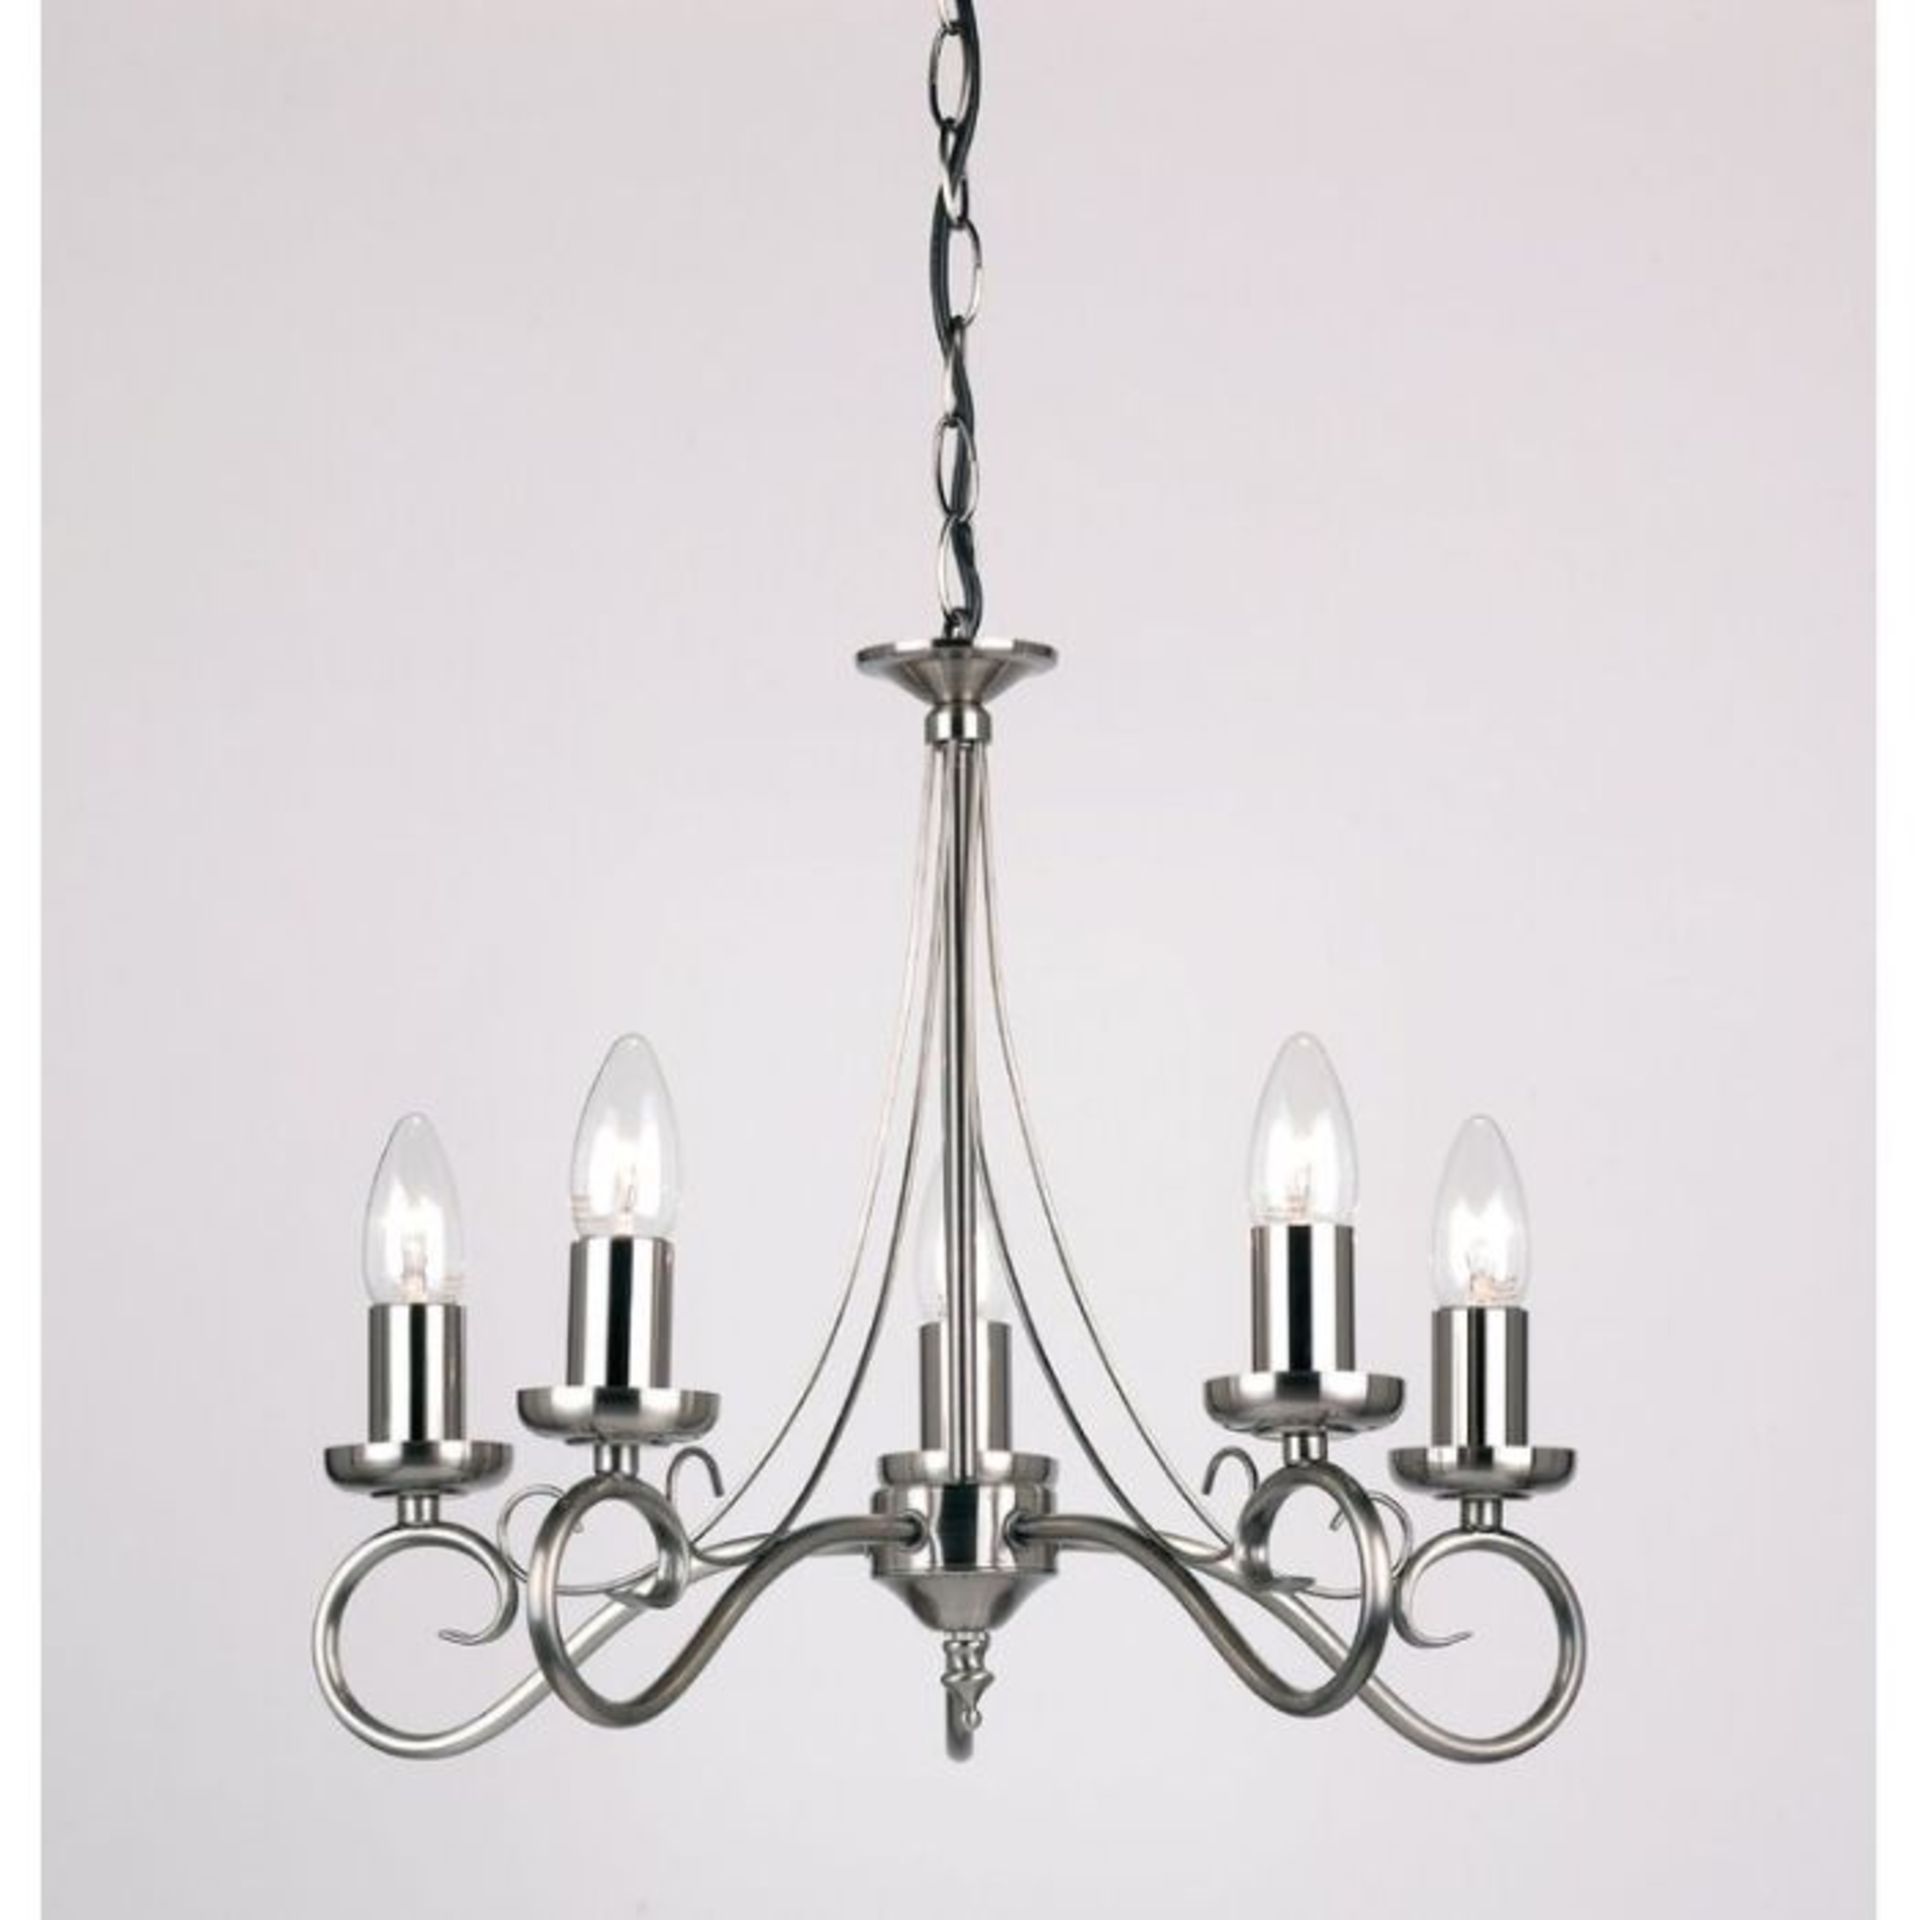 Three Posts, Ivanka 5-Light Candle Style Chandelier (ANTIQUE SILVER) - RRP £107 (UEL1392 - 26151/4)